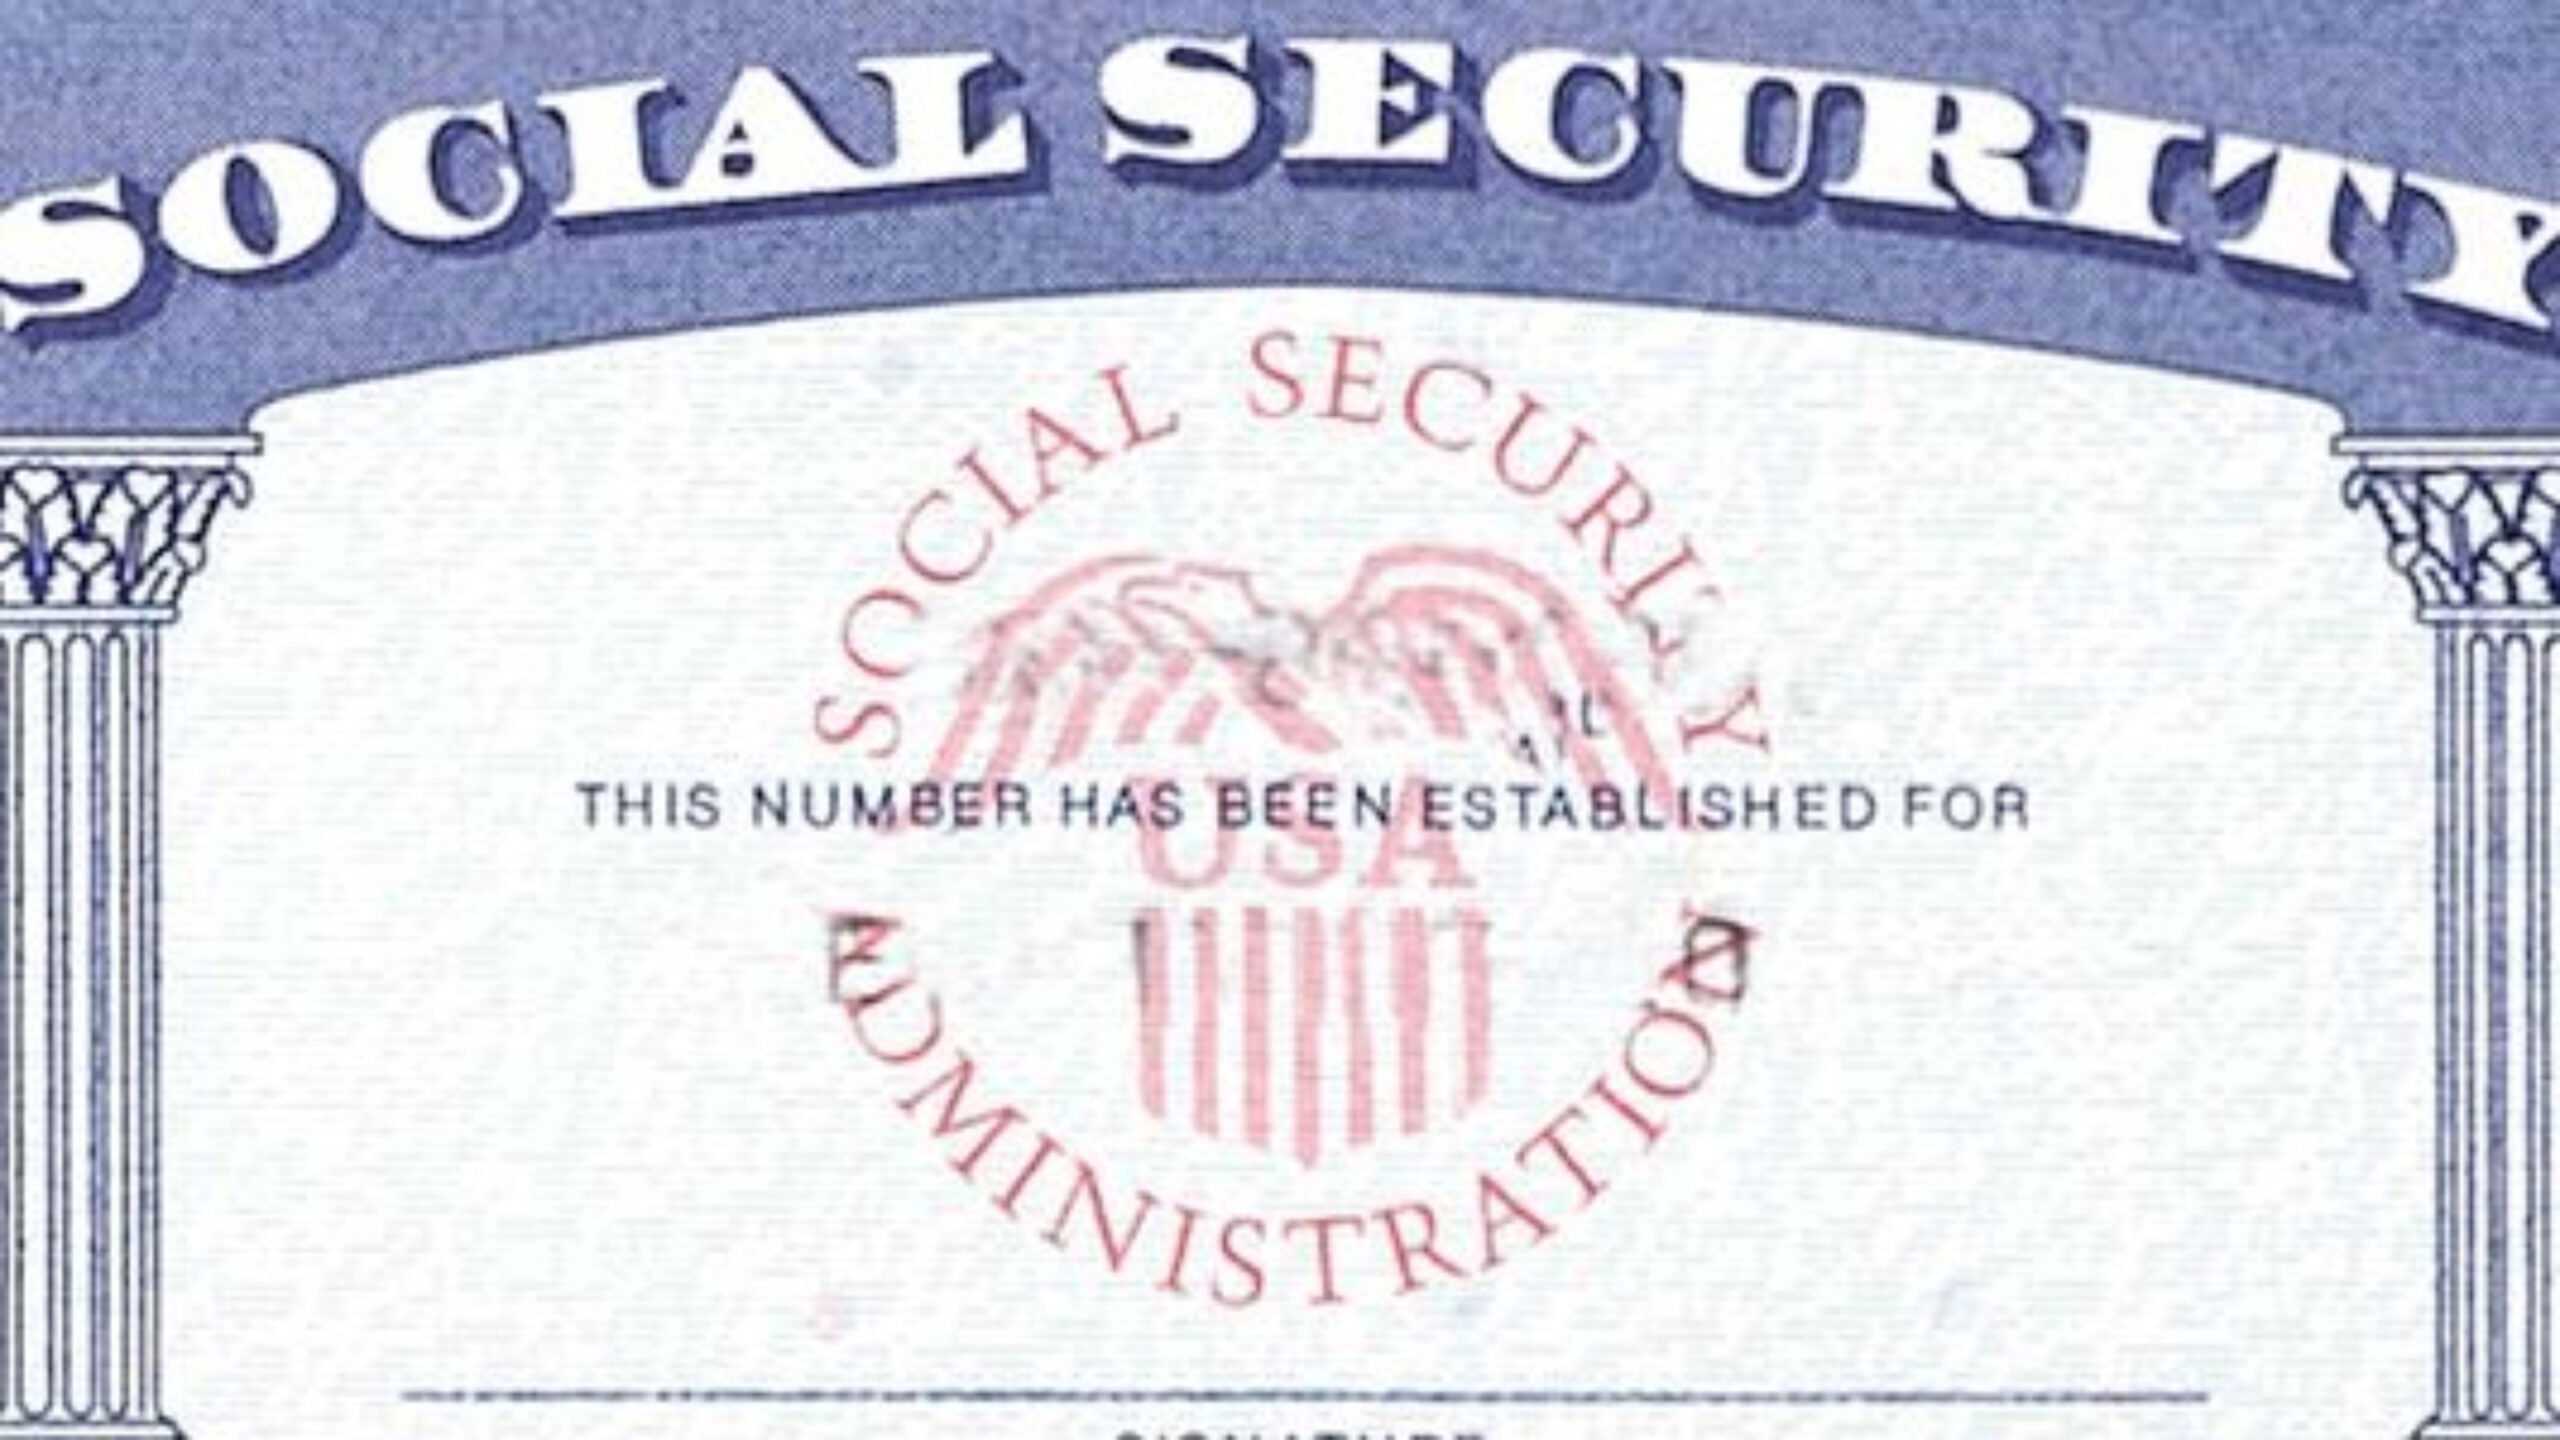 Blank Social Security Card Template Download - Great Inside Blank Social Security Card Template Download